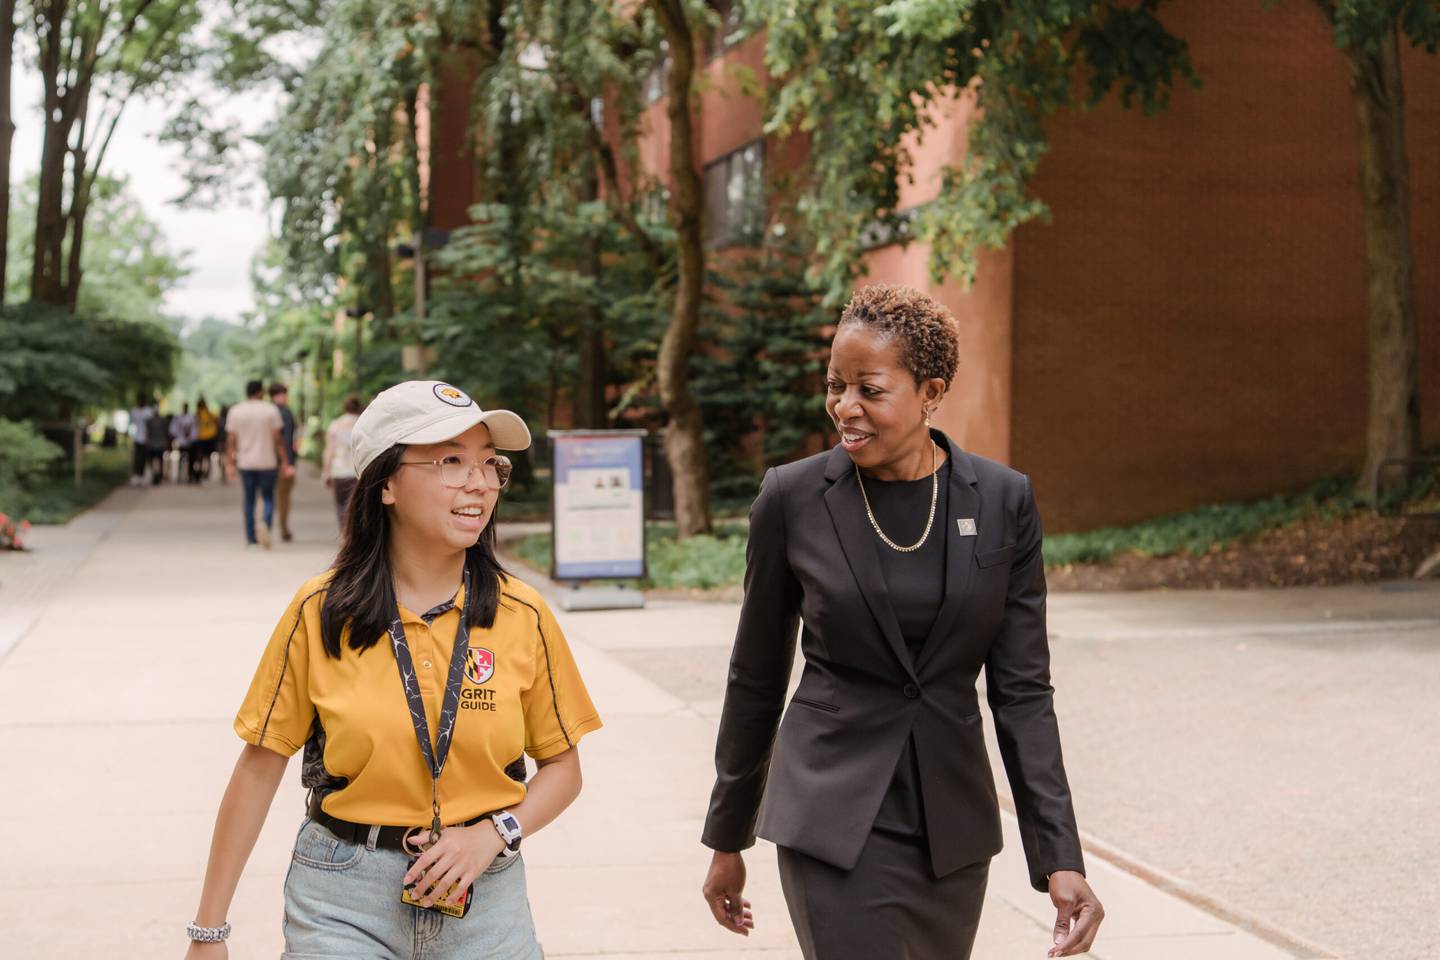 Student Sianna Serio and President Sheares Ashby walking together on campus.